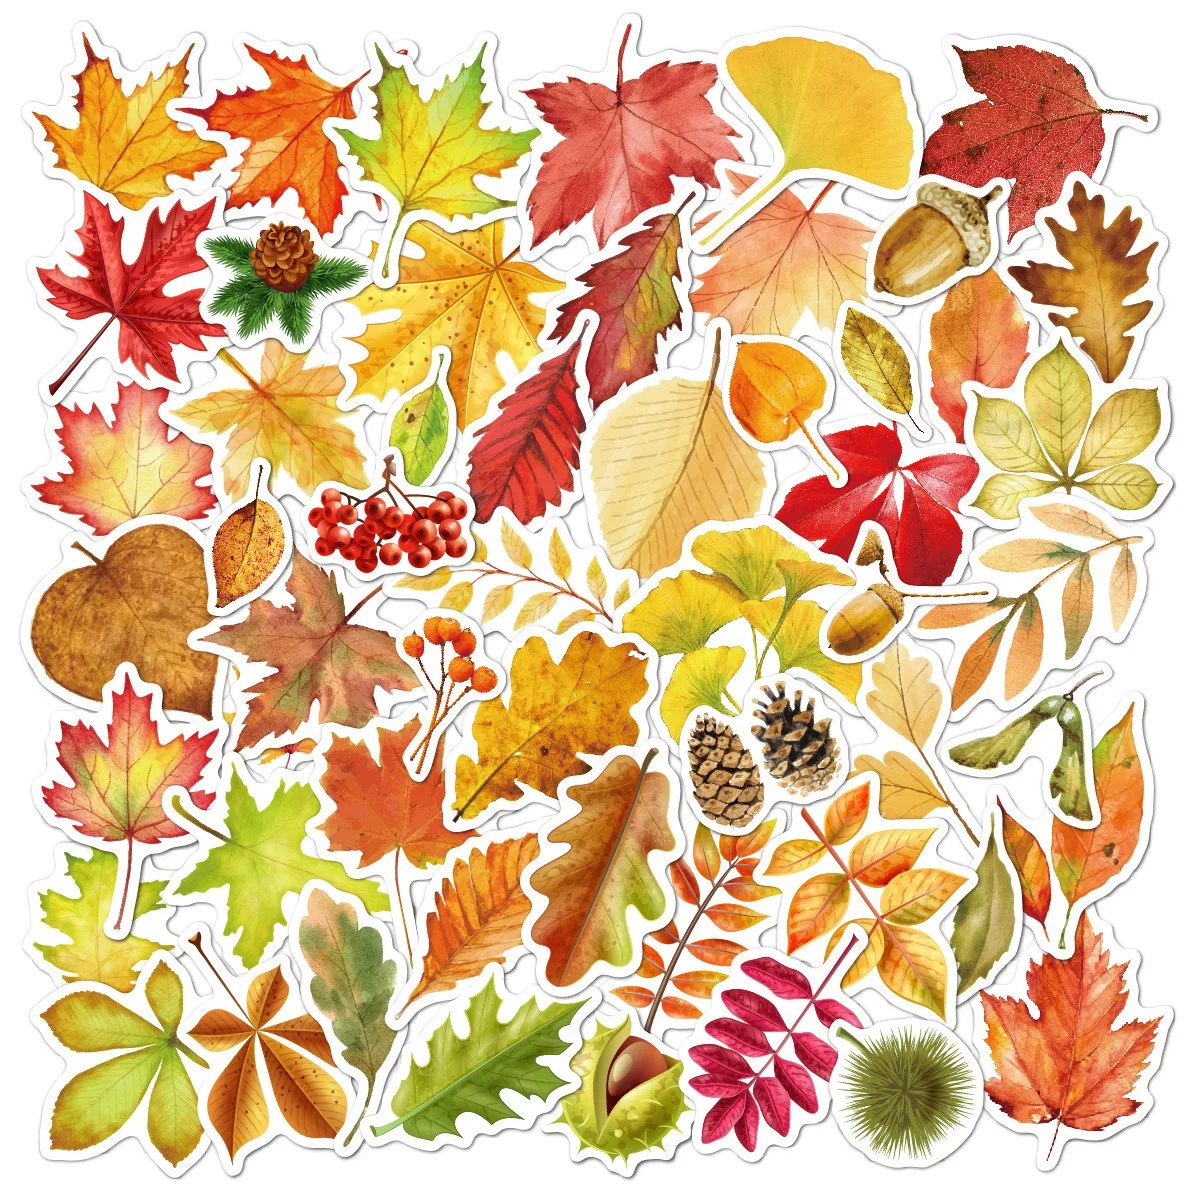 

55pcs leaves autumn leaves graffiti stickers laptop phone case trolley suitcase waterproof maple leaf stickers